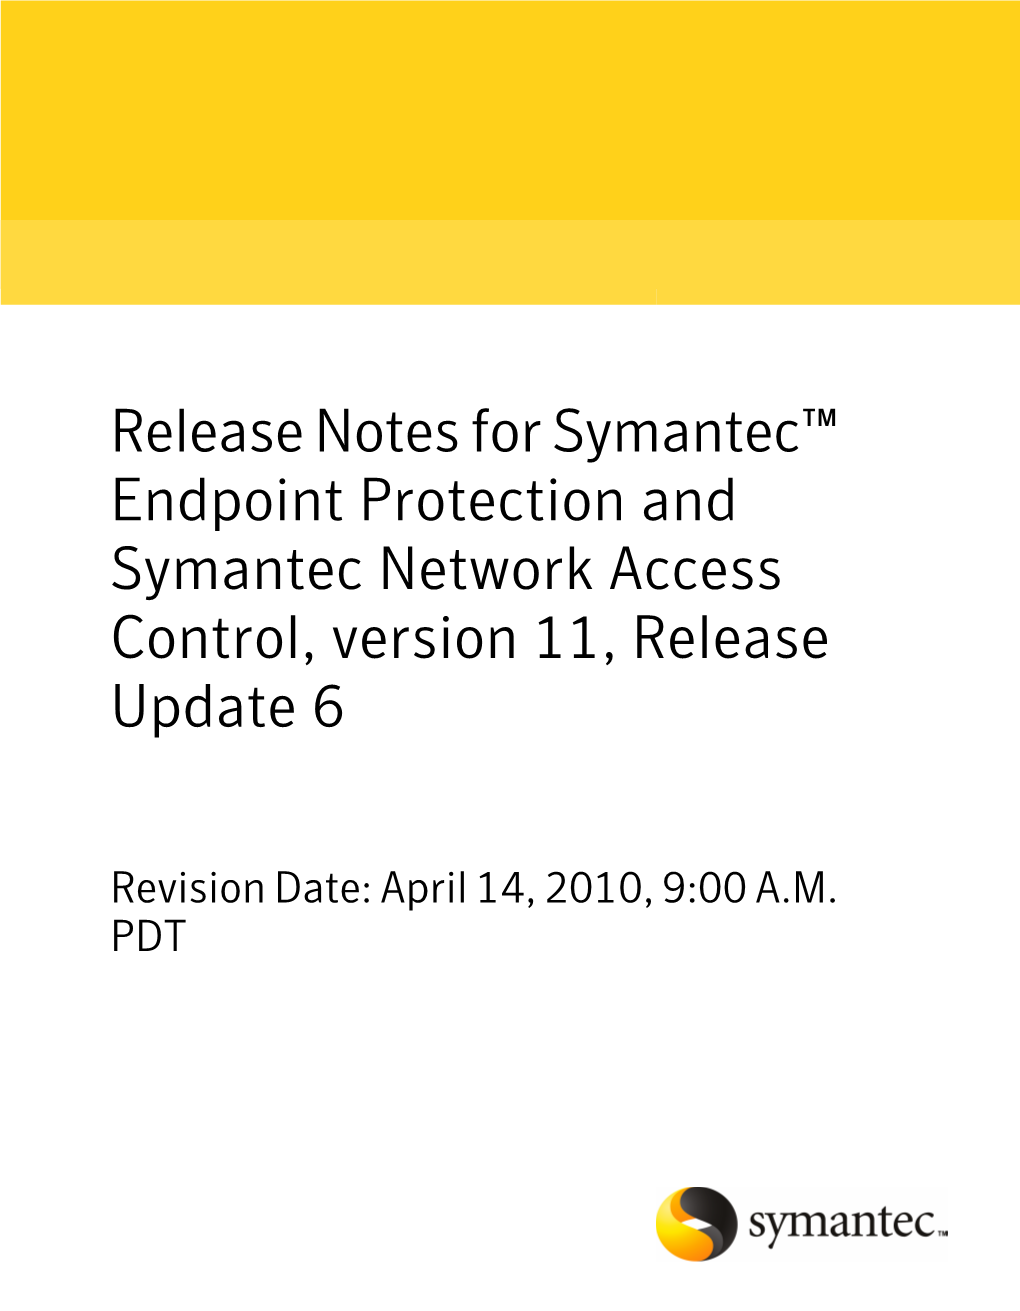 Release Notes for Symantec™ Endpoint Protection and Symantec Network Access Control, Version 11, Release Update 6